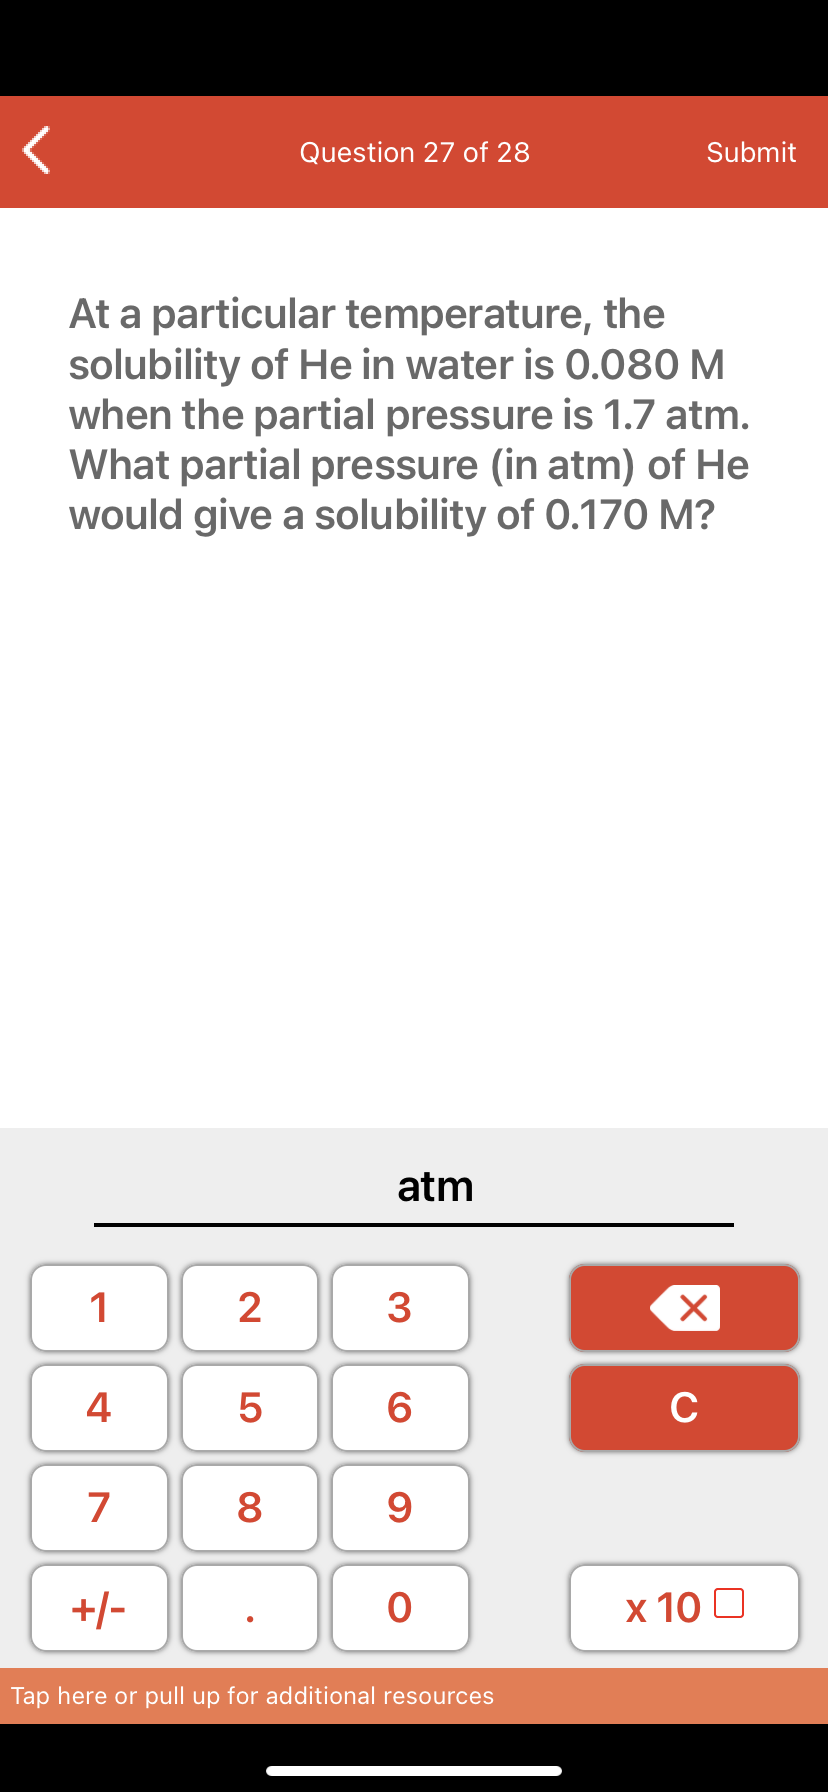 Question 27 of 28
Submit
At a particular temperature, the
solubility of He in water is O.080 M
when the partial pressure is 1.7 atm.
What partial pressure (in atm) of He
would give a solubility of 0.170 M?
atm
1
2
3
4 5
C
7
8
9
+/-
х 10 0
Tap here or pull up for additional resources
